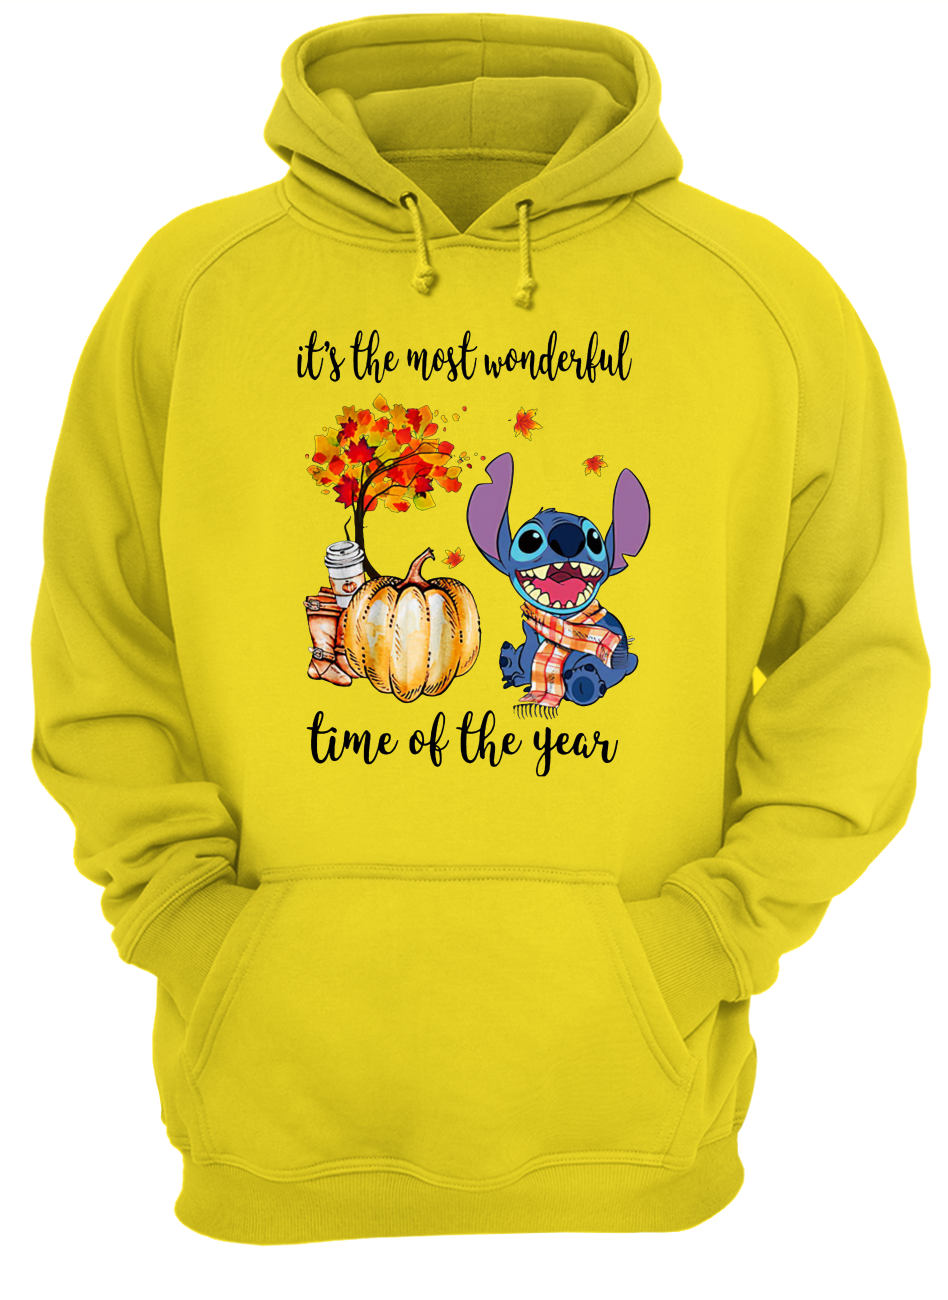 Stitch it’s the most wonderful time of the year hoodie